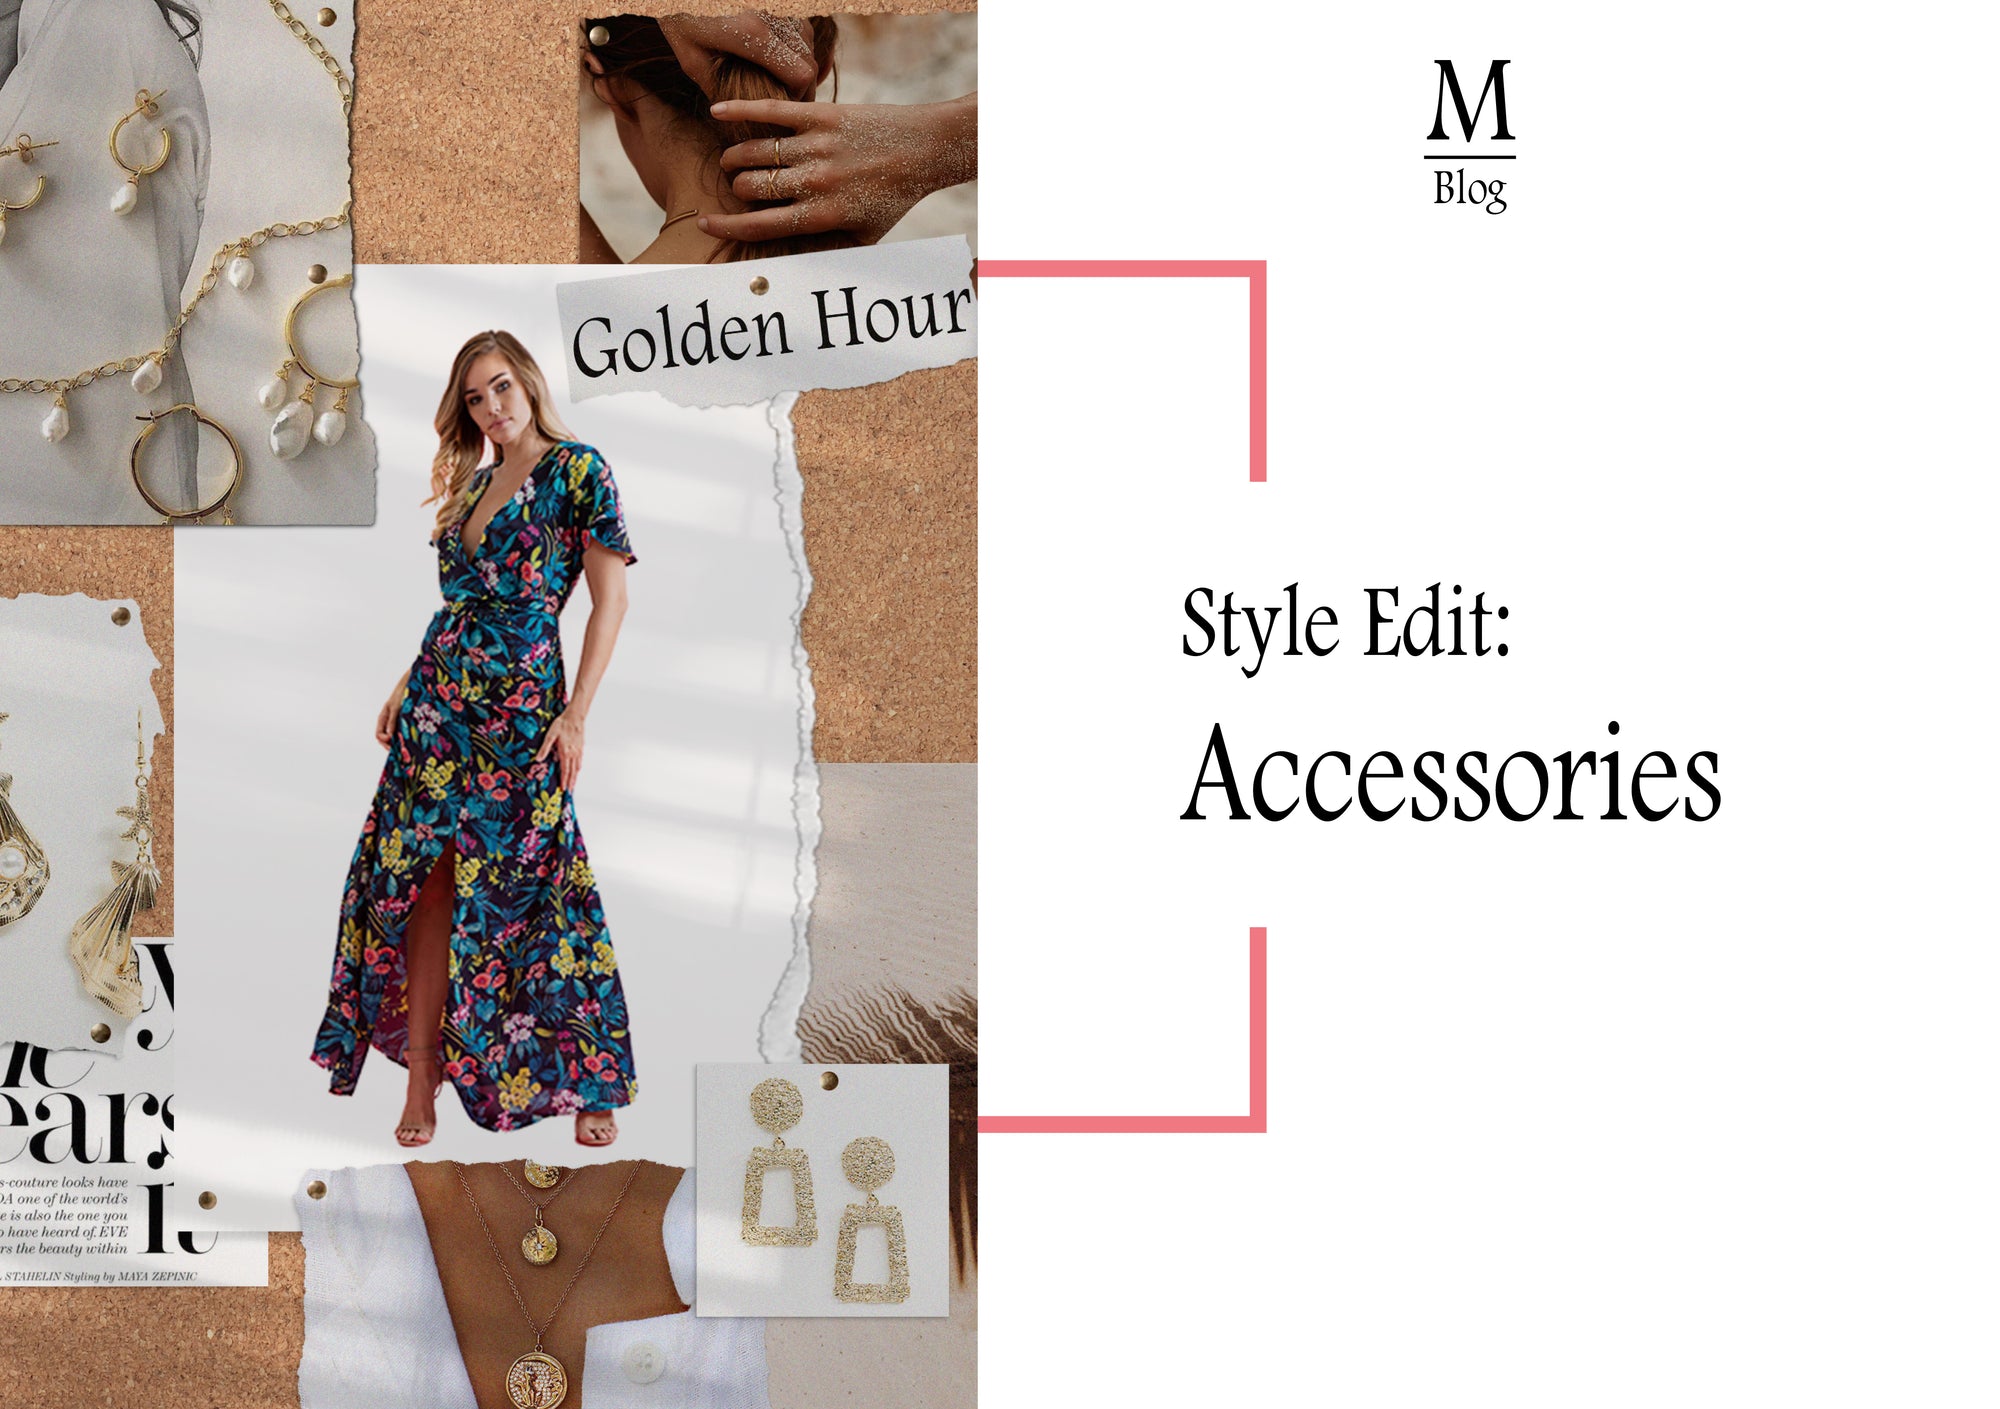 STYLE EDIT: Accessories